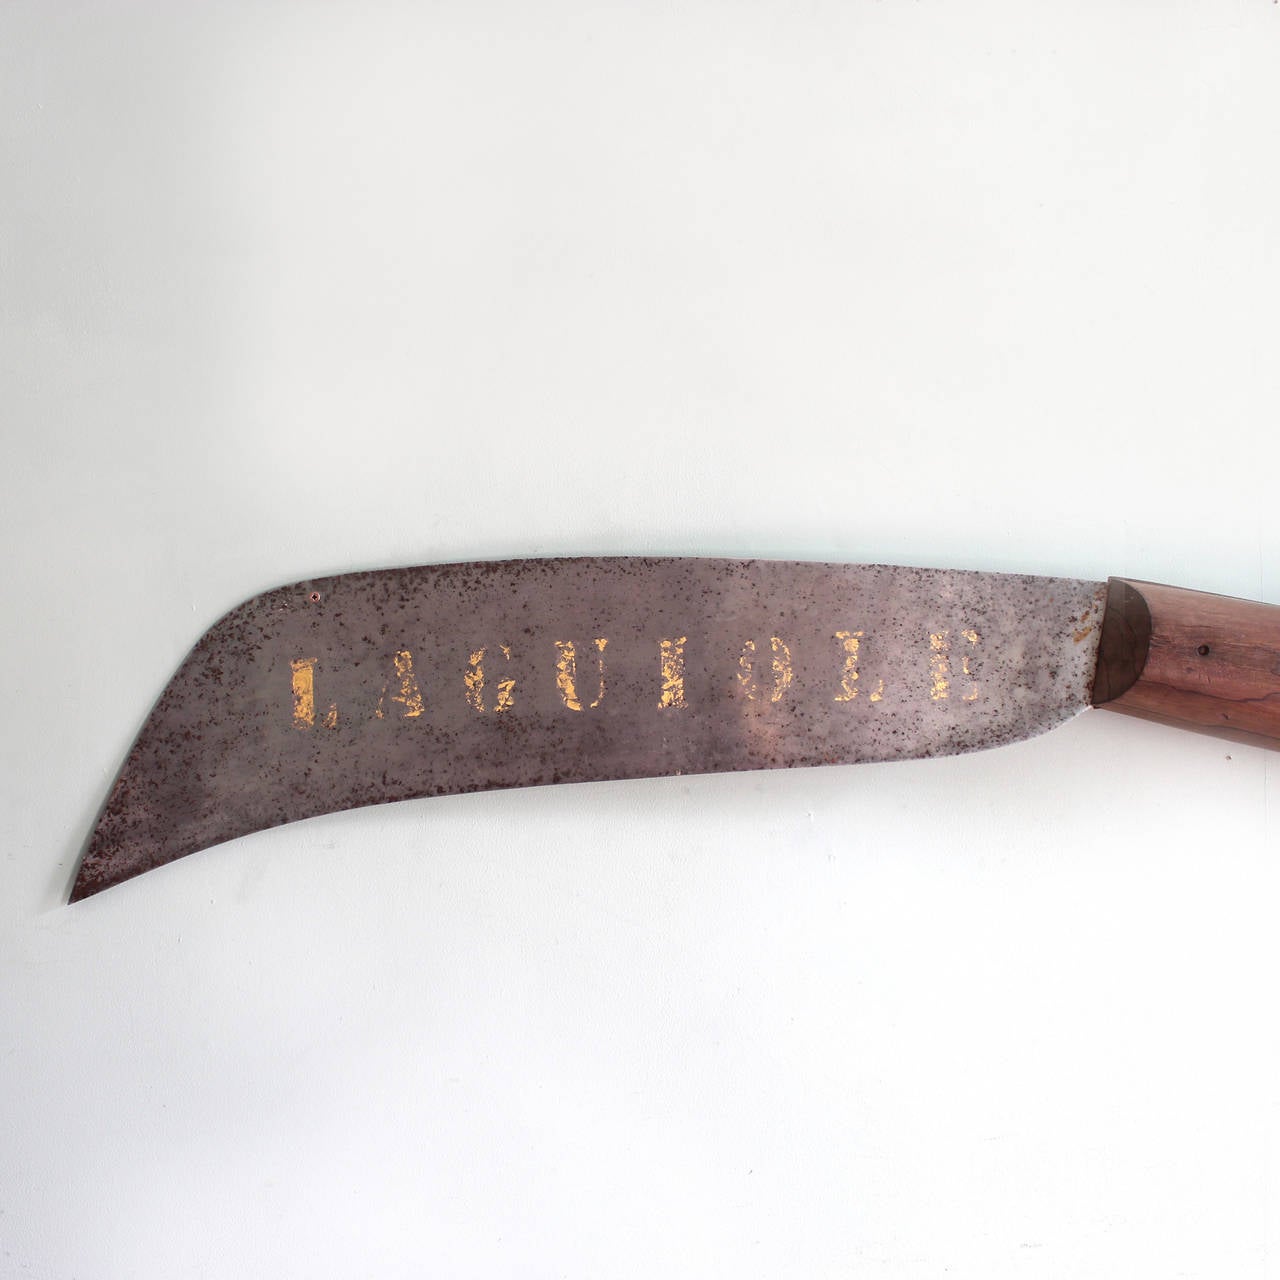 A late 19th century French trade sign, with timber handle, steel blade and old lettering 'LAGUIOLE'.

Available to view at LASSCO Brunswick House.

Dimensions:
width 139 cm 
height 21 cm
depth 11 cm